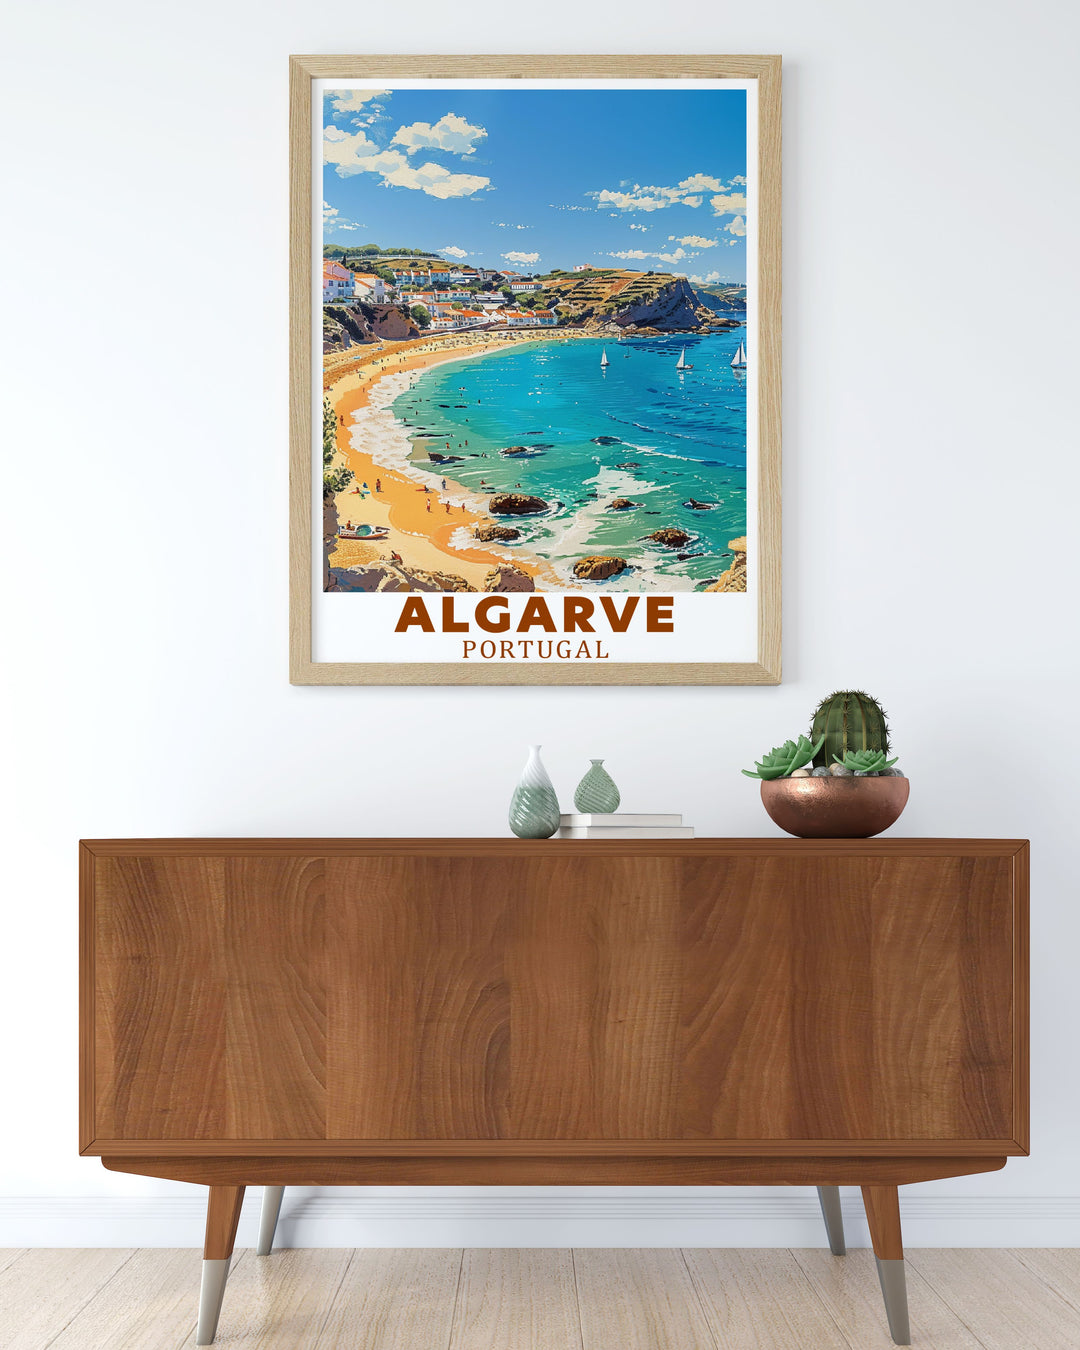 Featuring Lagos in the Algarve, this art print highlights the stunning coastline and serene ocean views, making it an ideal piece for beach lovers and coastal decor enthusiasts.